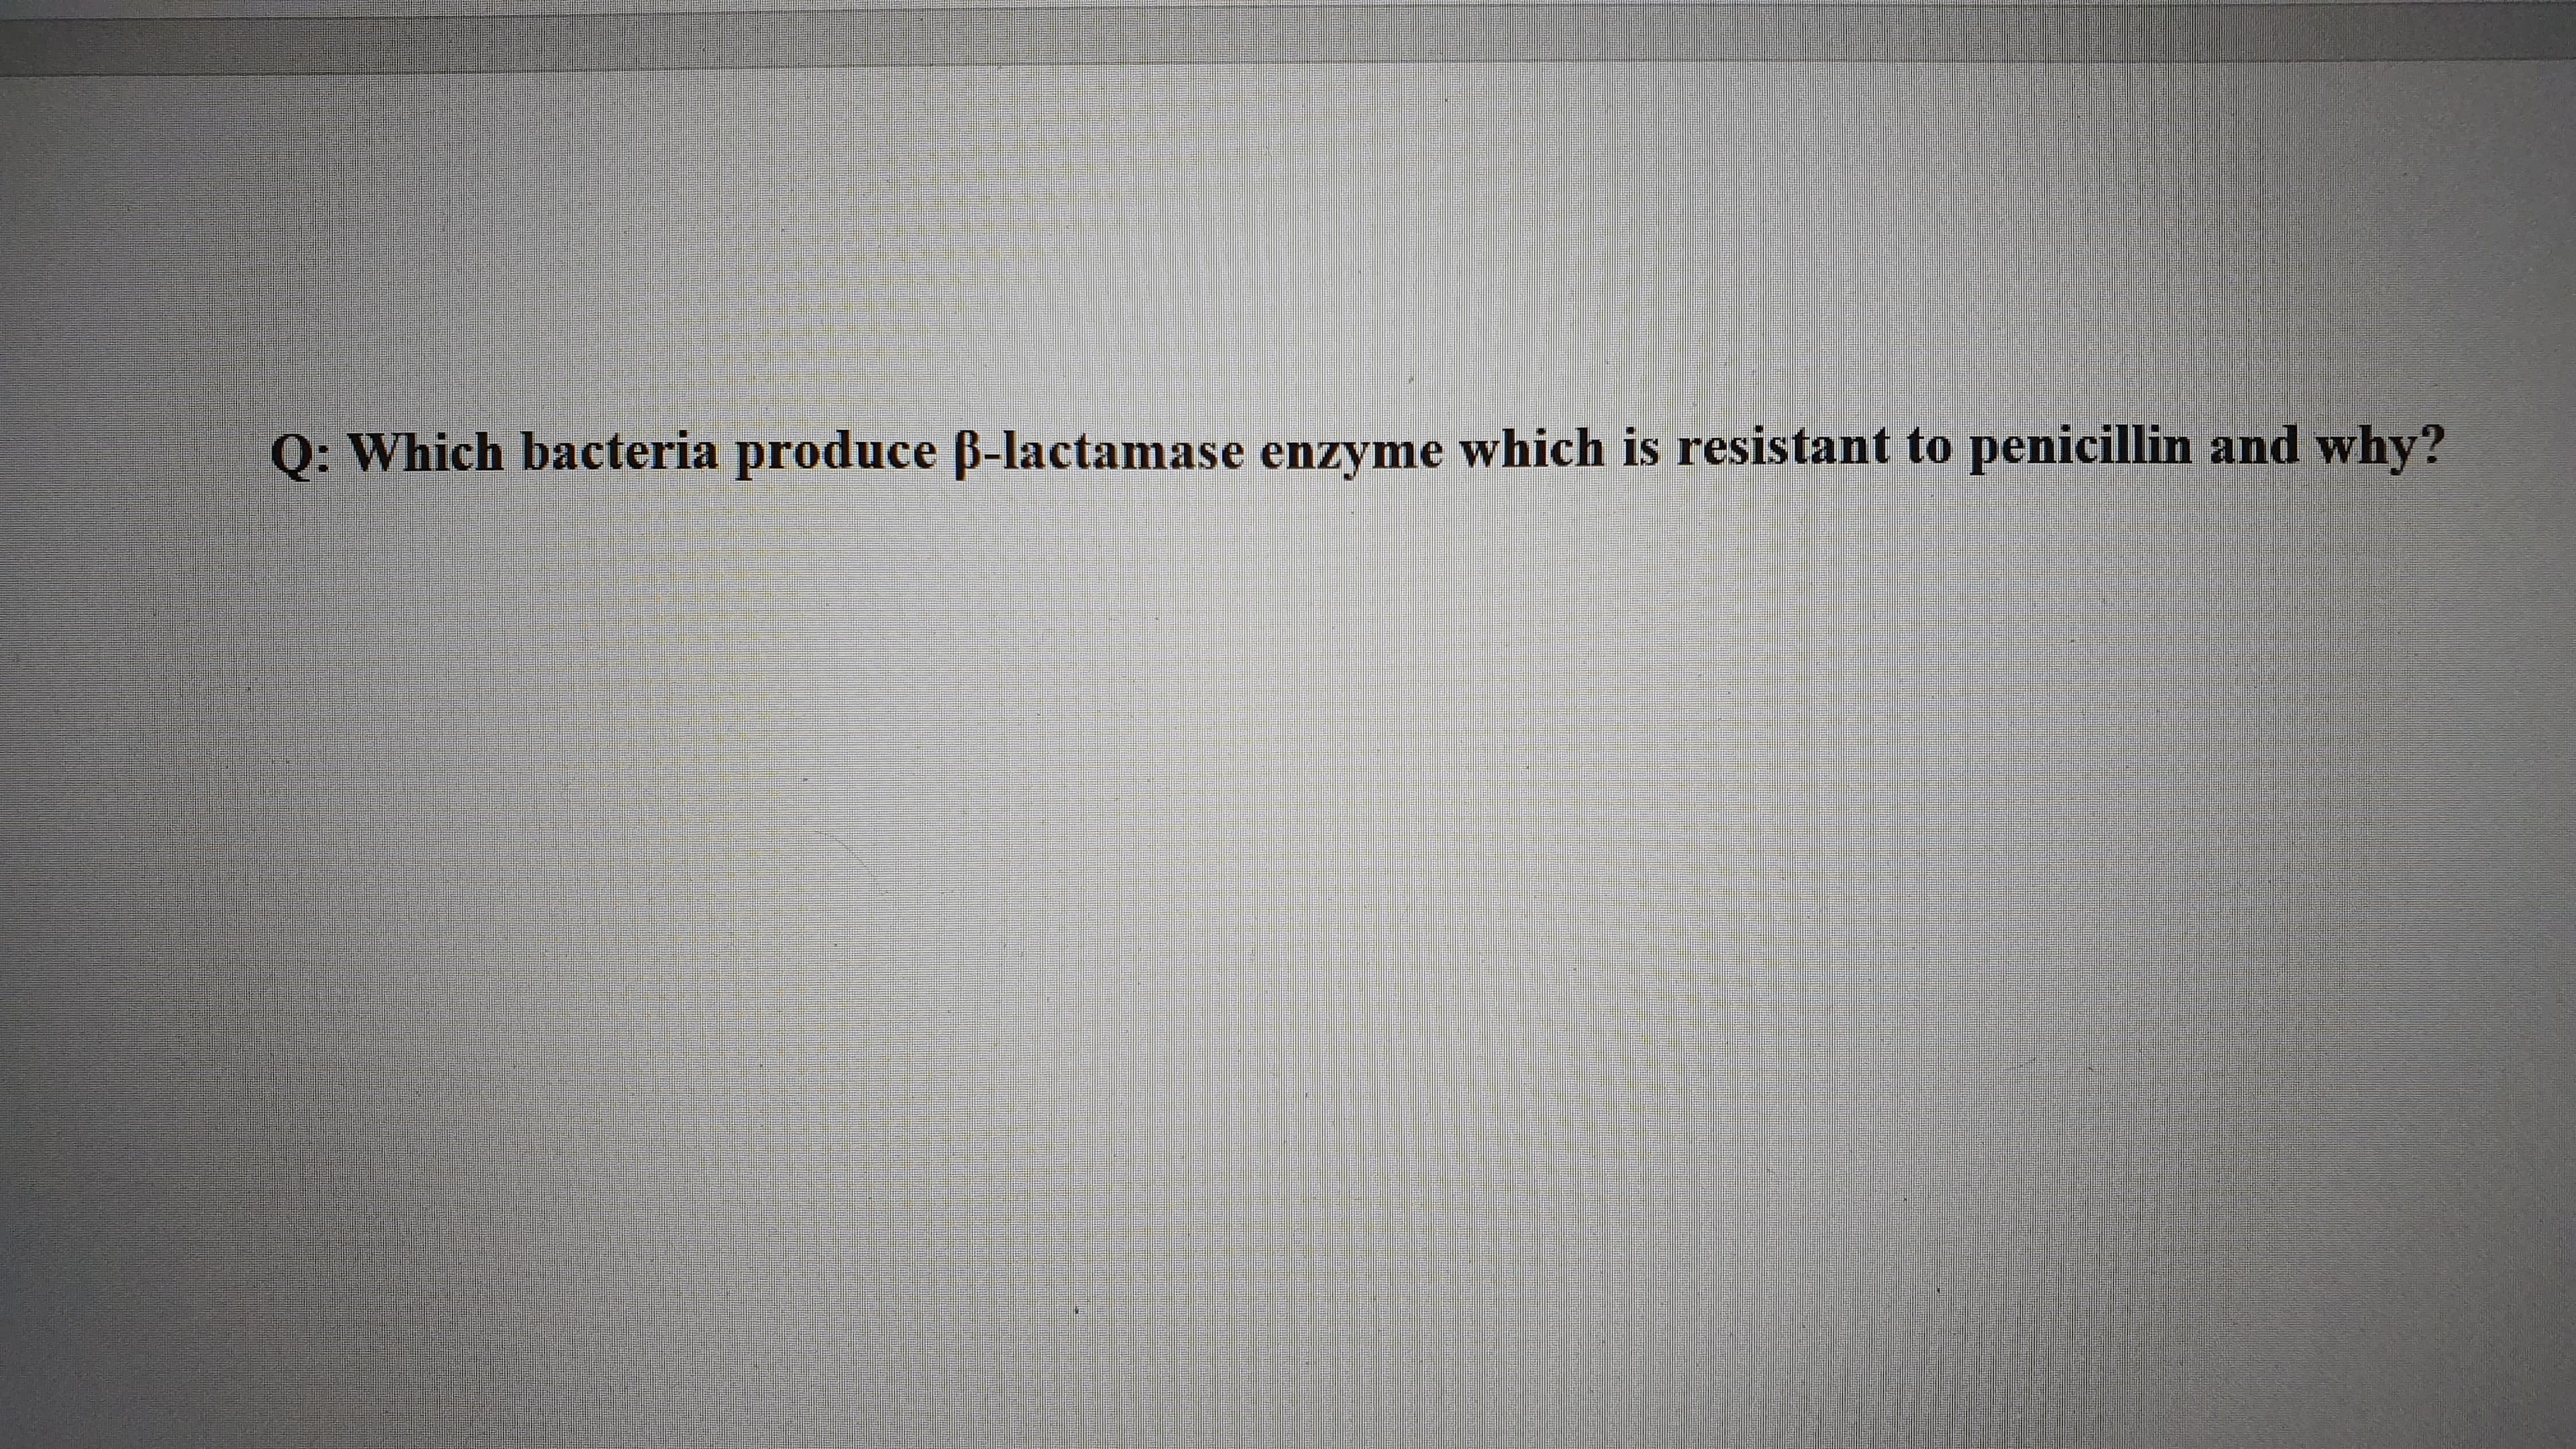 Which bacteria produce B-lactamase enzyme which is resistant to penicillin and why?
